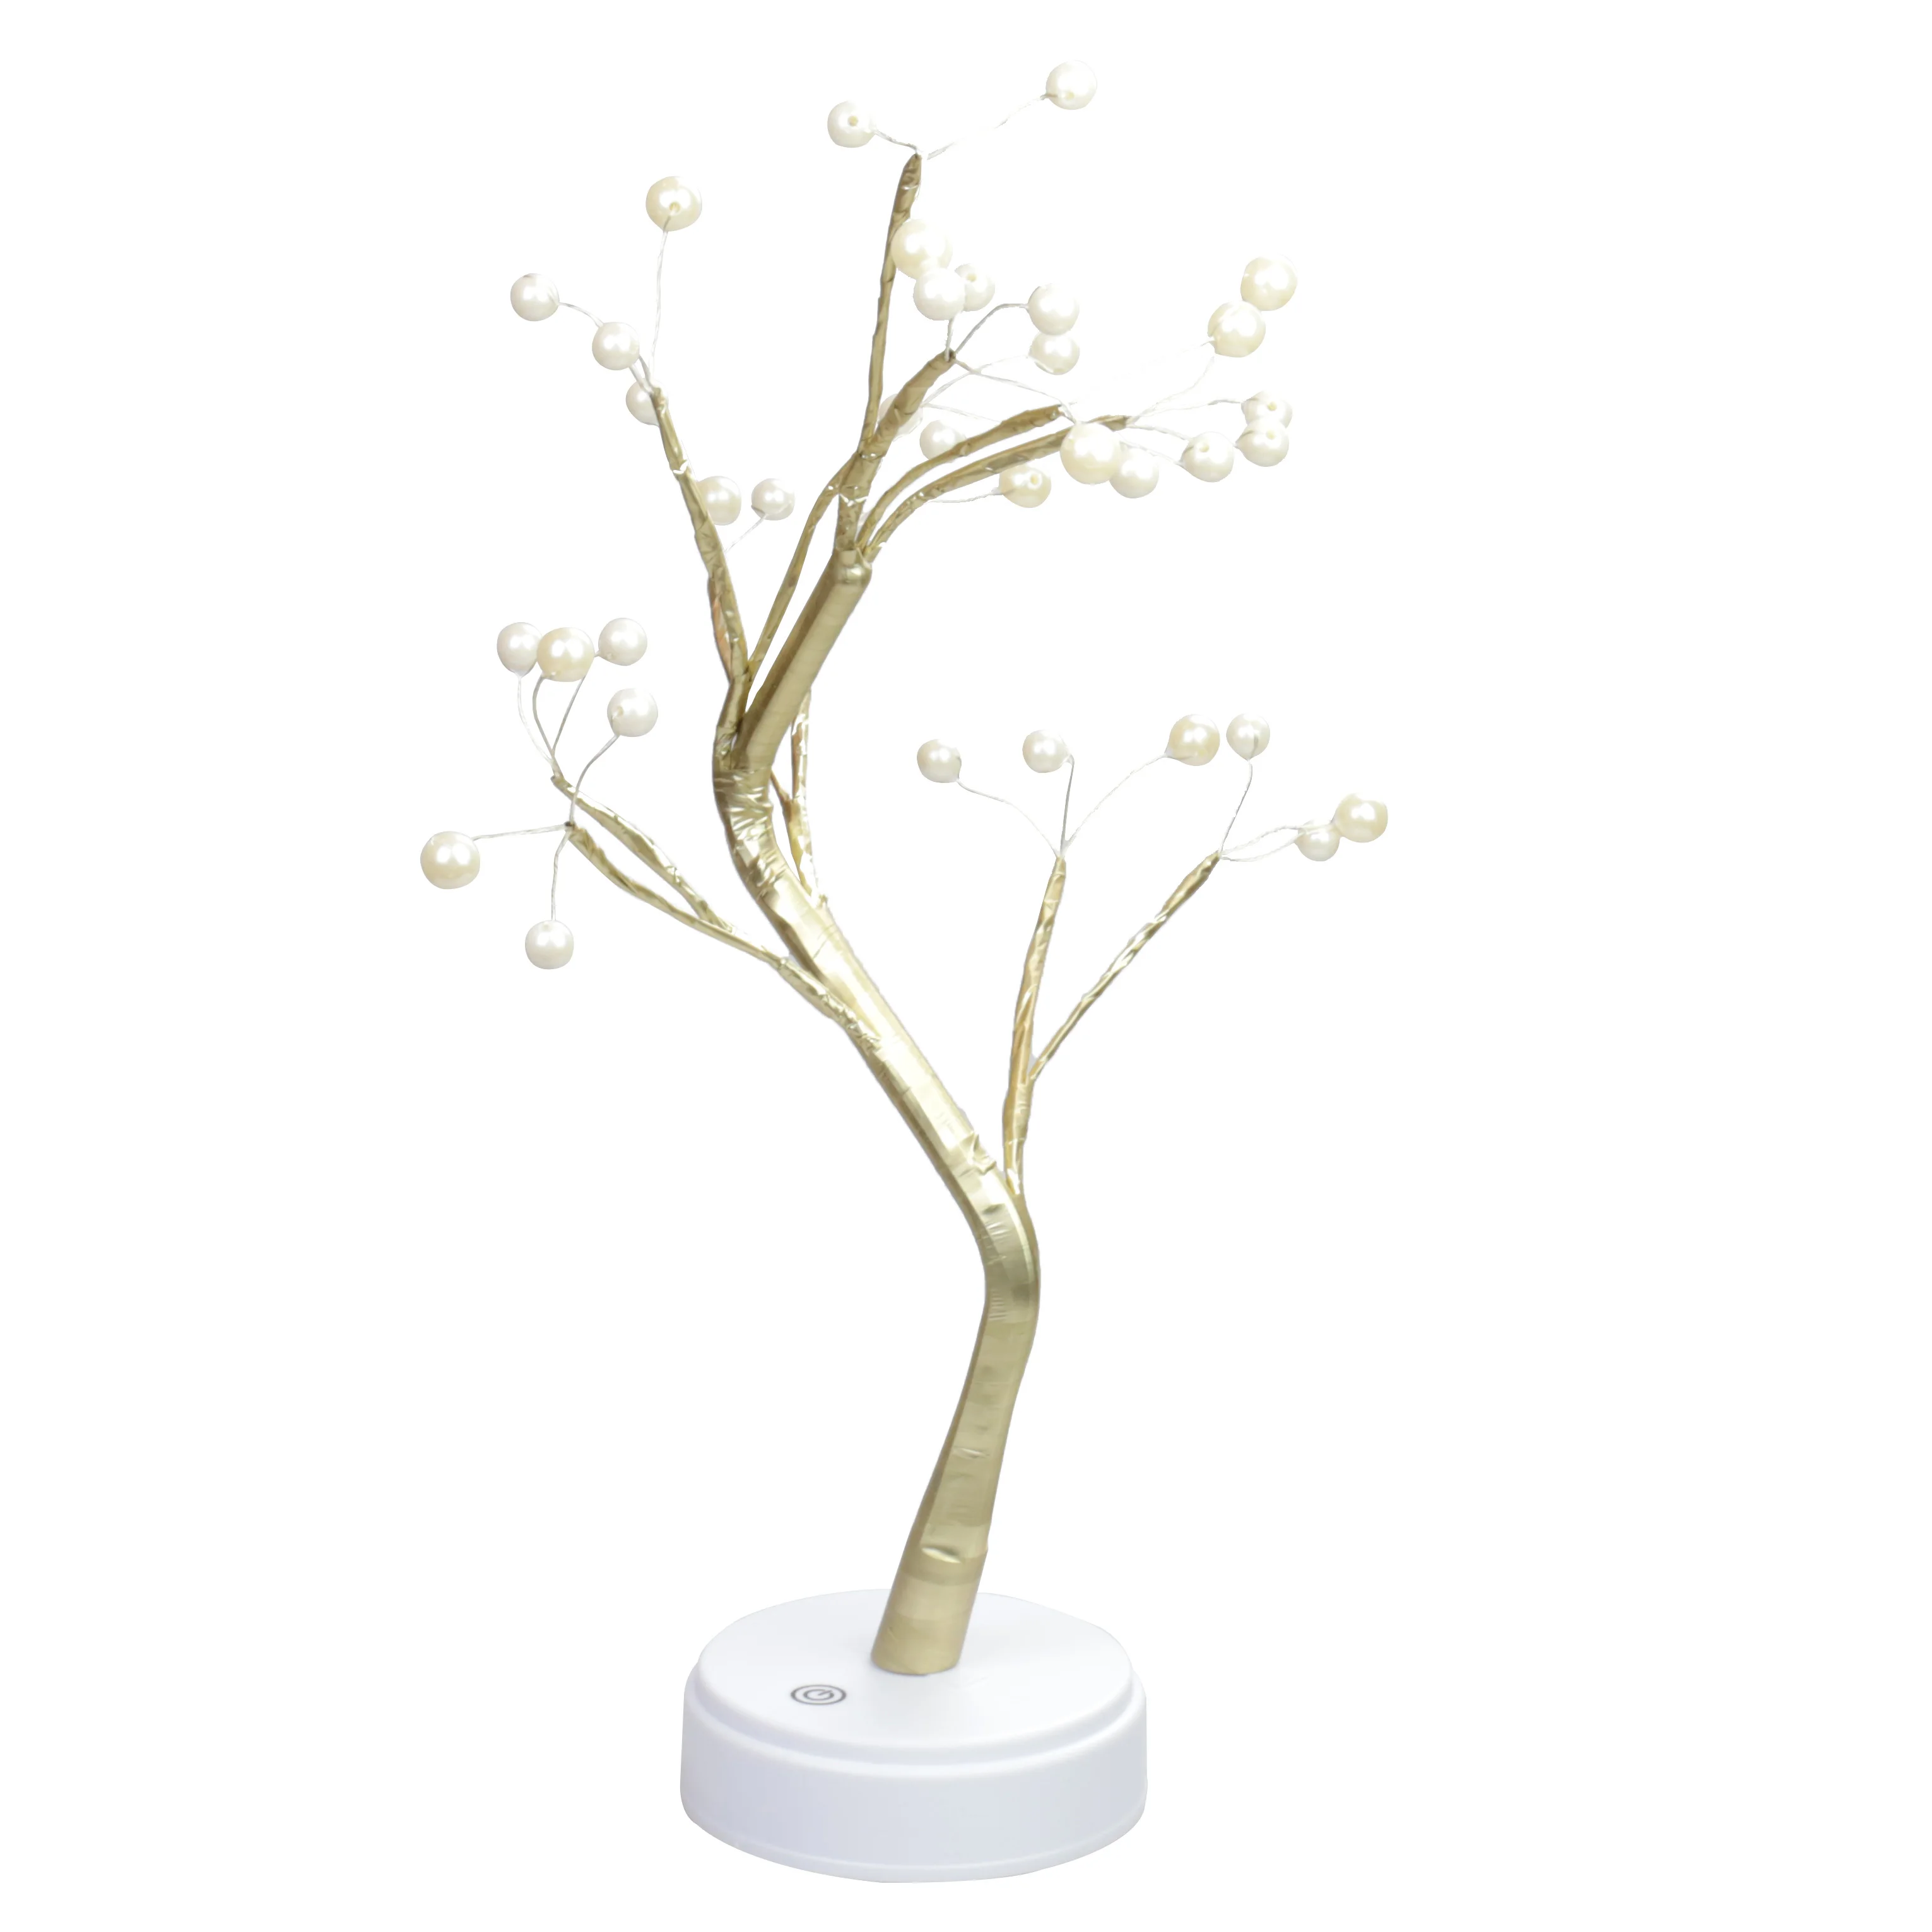 2020new design indoor cute Small golden ball tree lamp christmas 20 led string lights battery operated